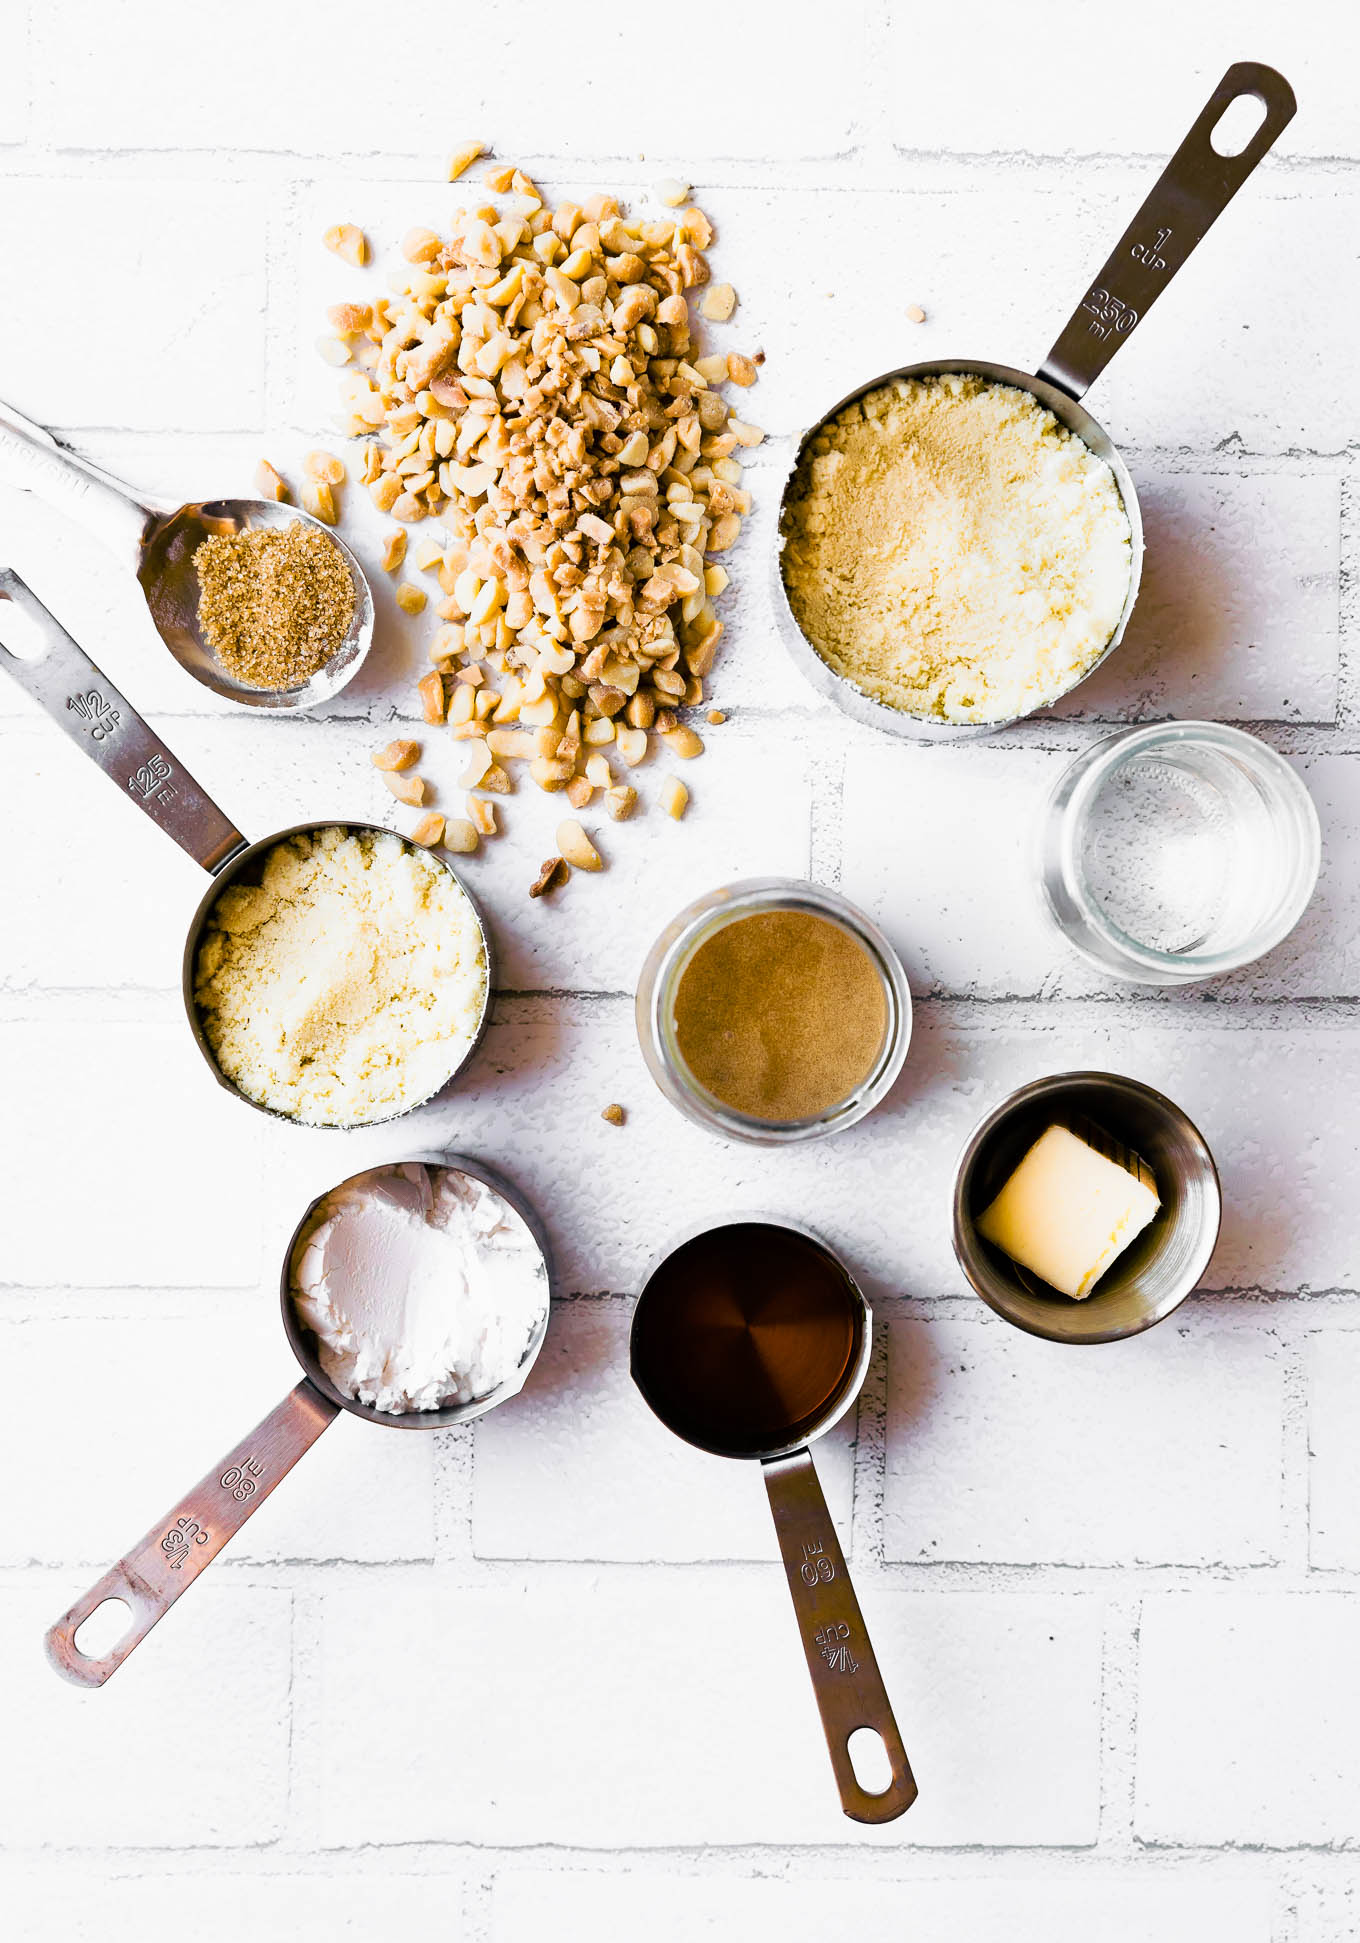 ingredients for maple bars arranged together in measuring cups and spoons.